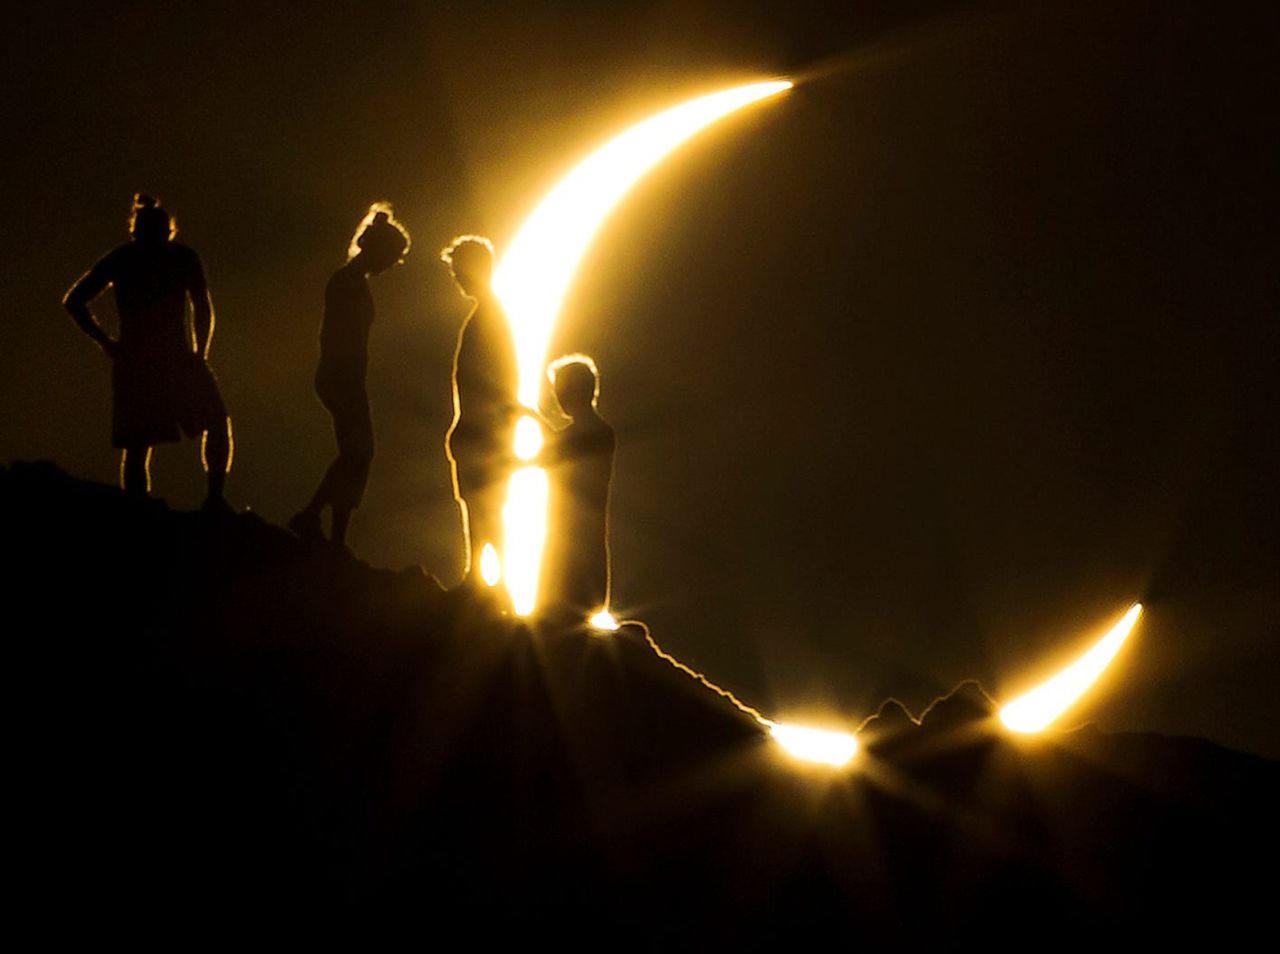 Hikers watch a partial solar eclipse from Papago Park in Phoenix, on May 20, 2012.